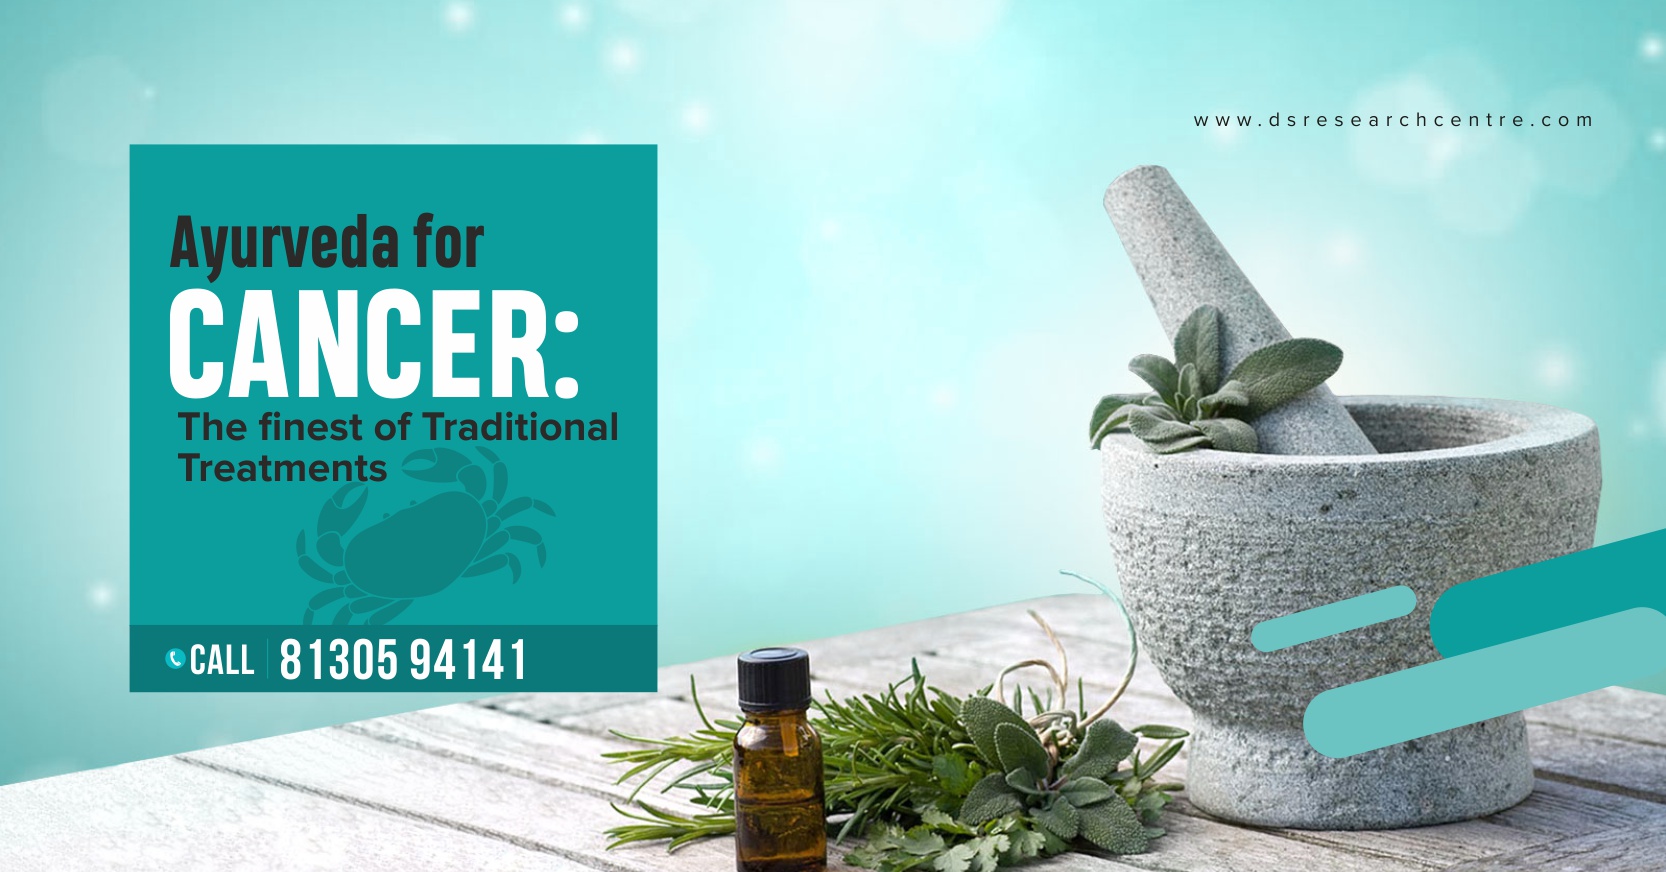 Ayurveda for Cancer: The finest of Traditional Treatments